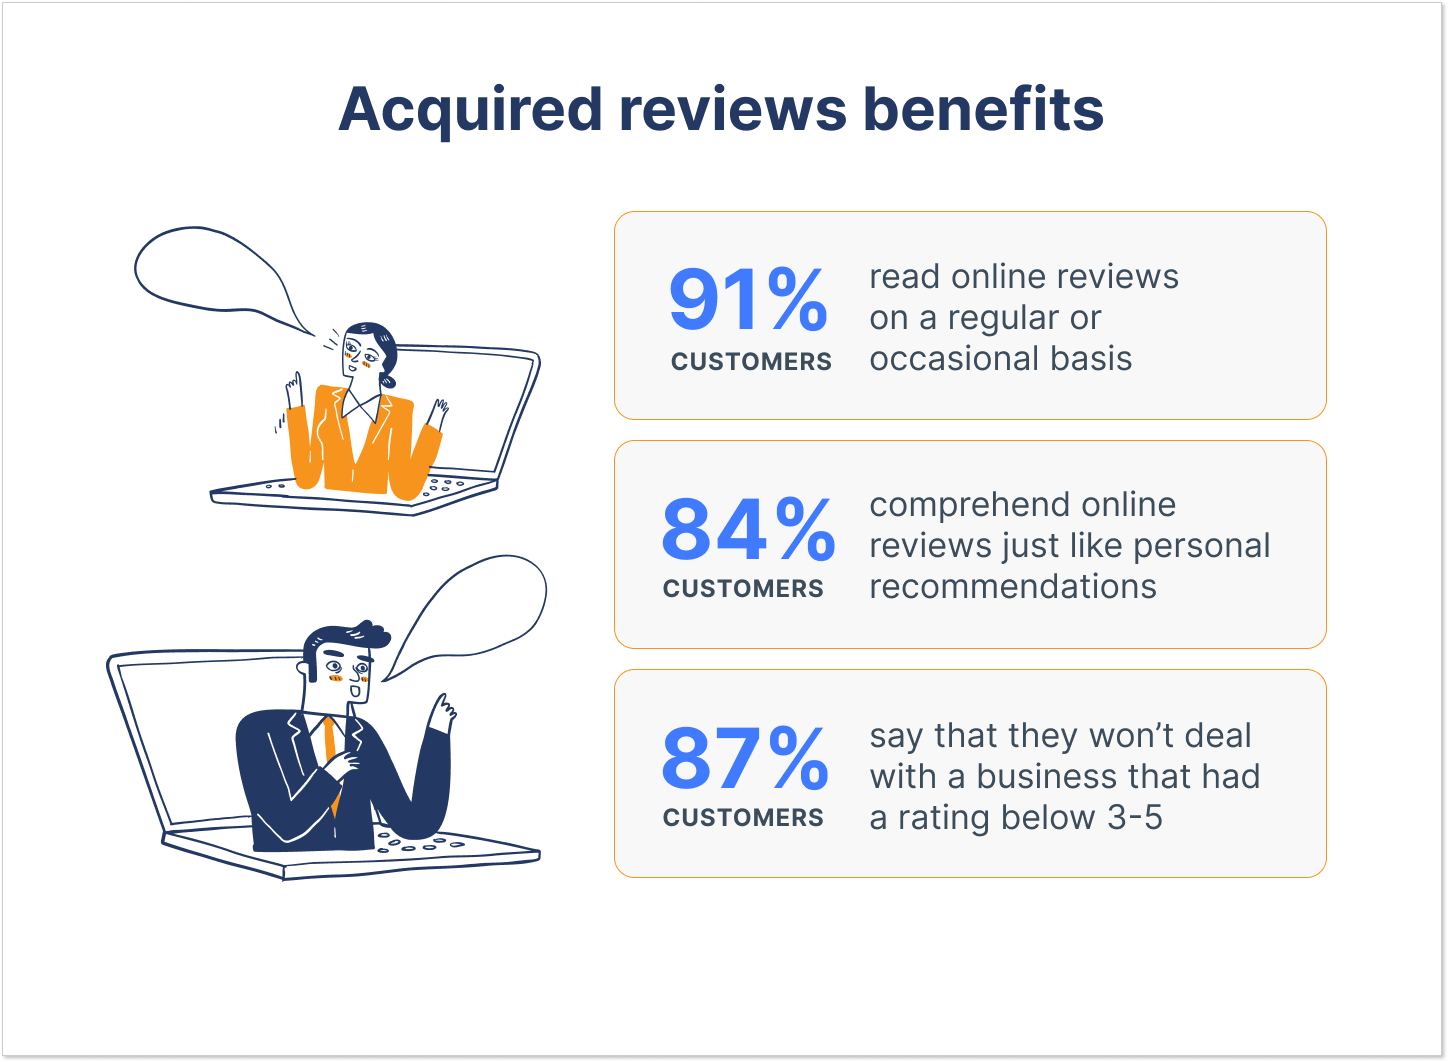 Acquired reviews benefits